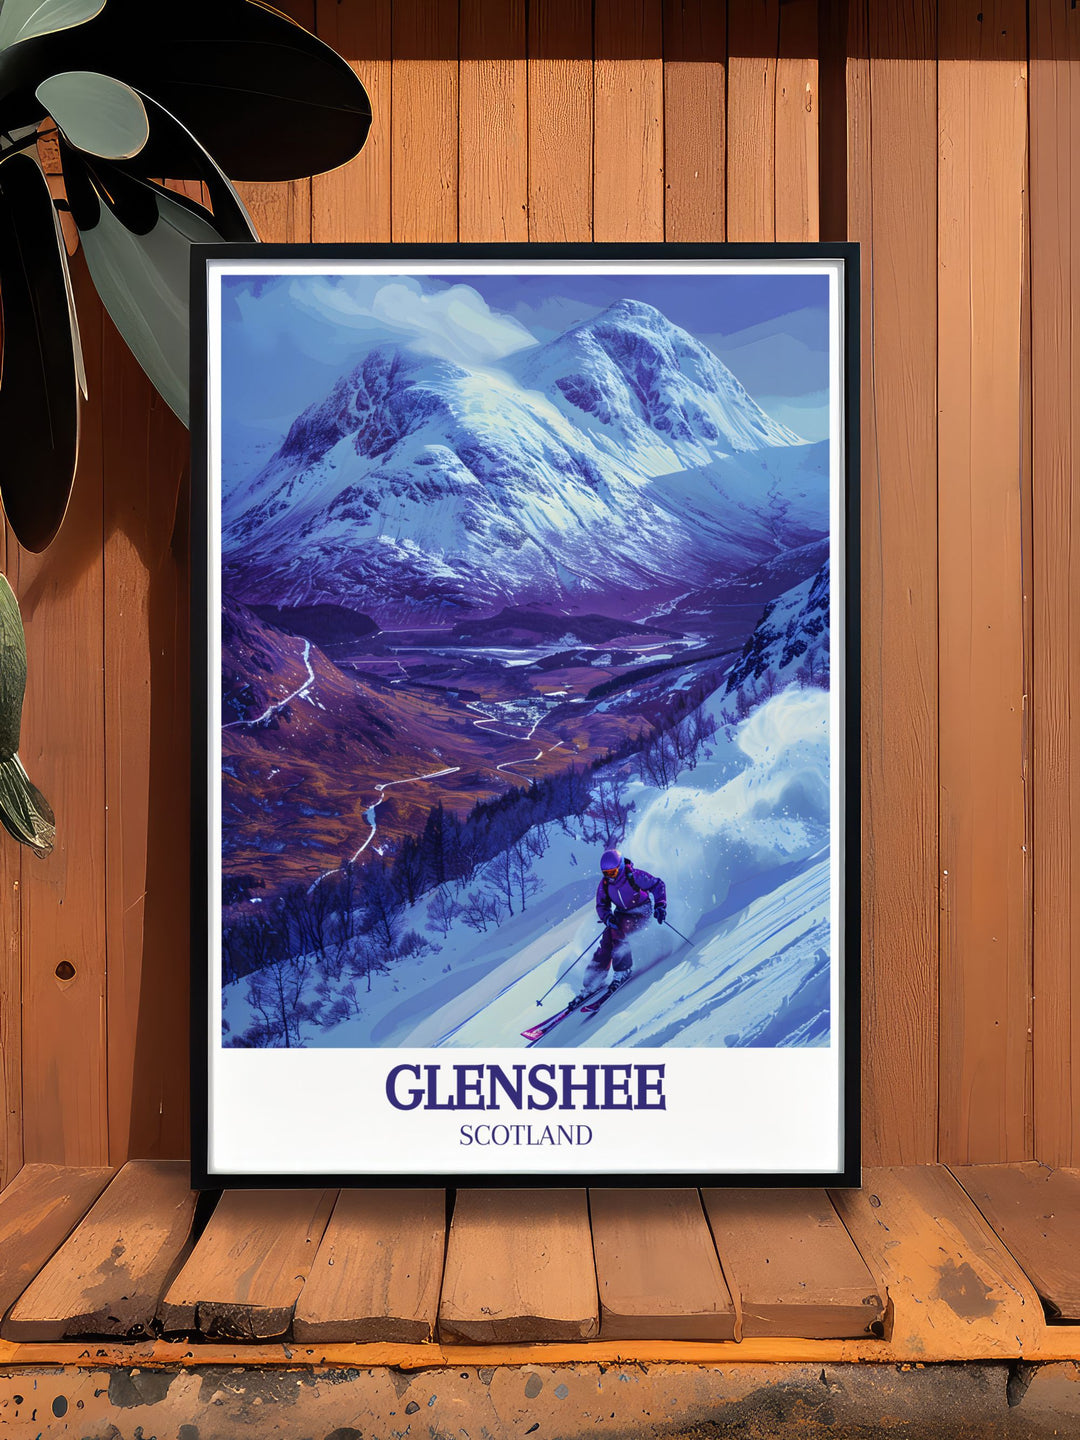 Showcasing the vibrant energy of Glenshee Ski Resort, this poster is ideal for winter sports lovers. The detailed illustrations highlight the resorts dynamic trails and modern facilities, bringing the excitement of skiing in Scotland into your home.